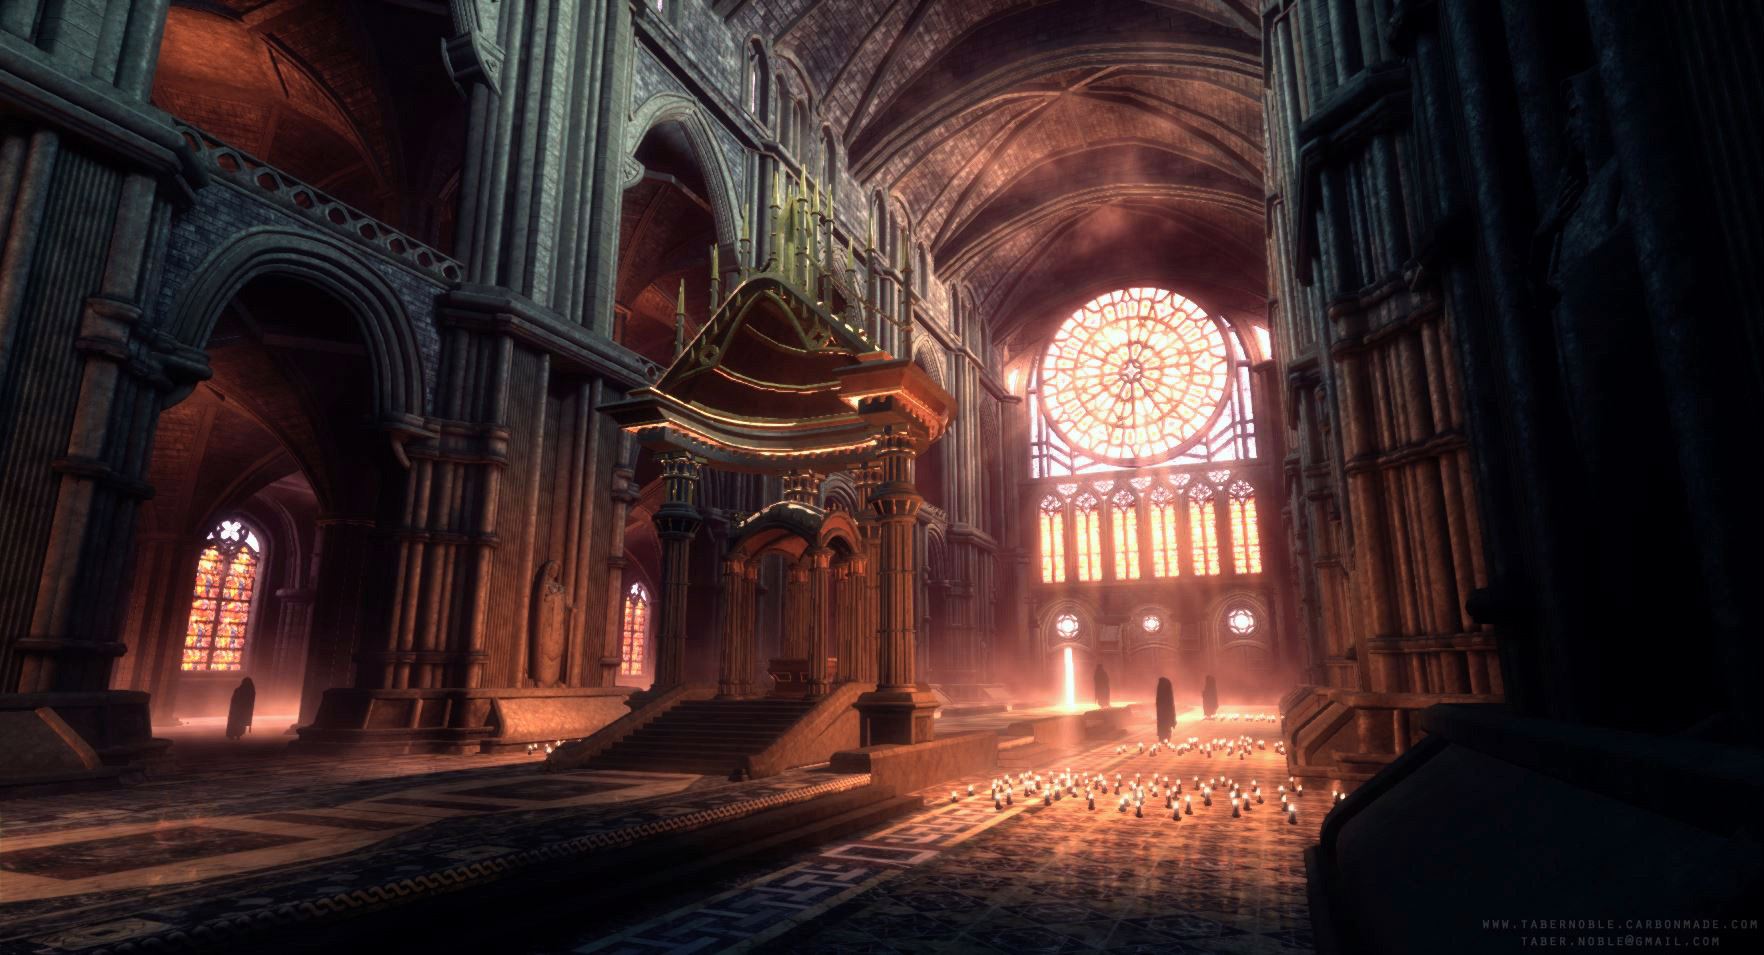 udk___the_cathedral_by_therealfroman-d68hua6.jpg